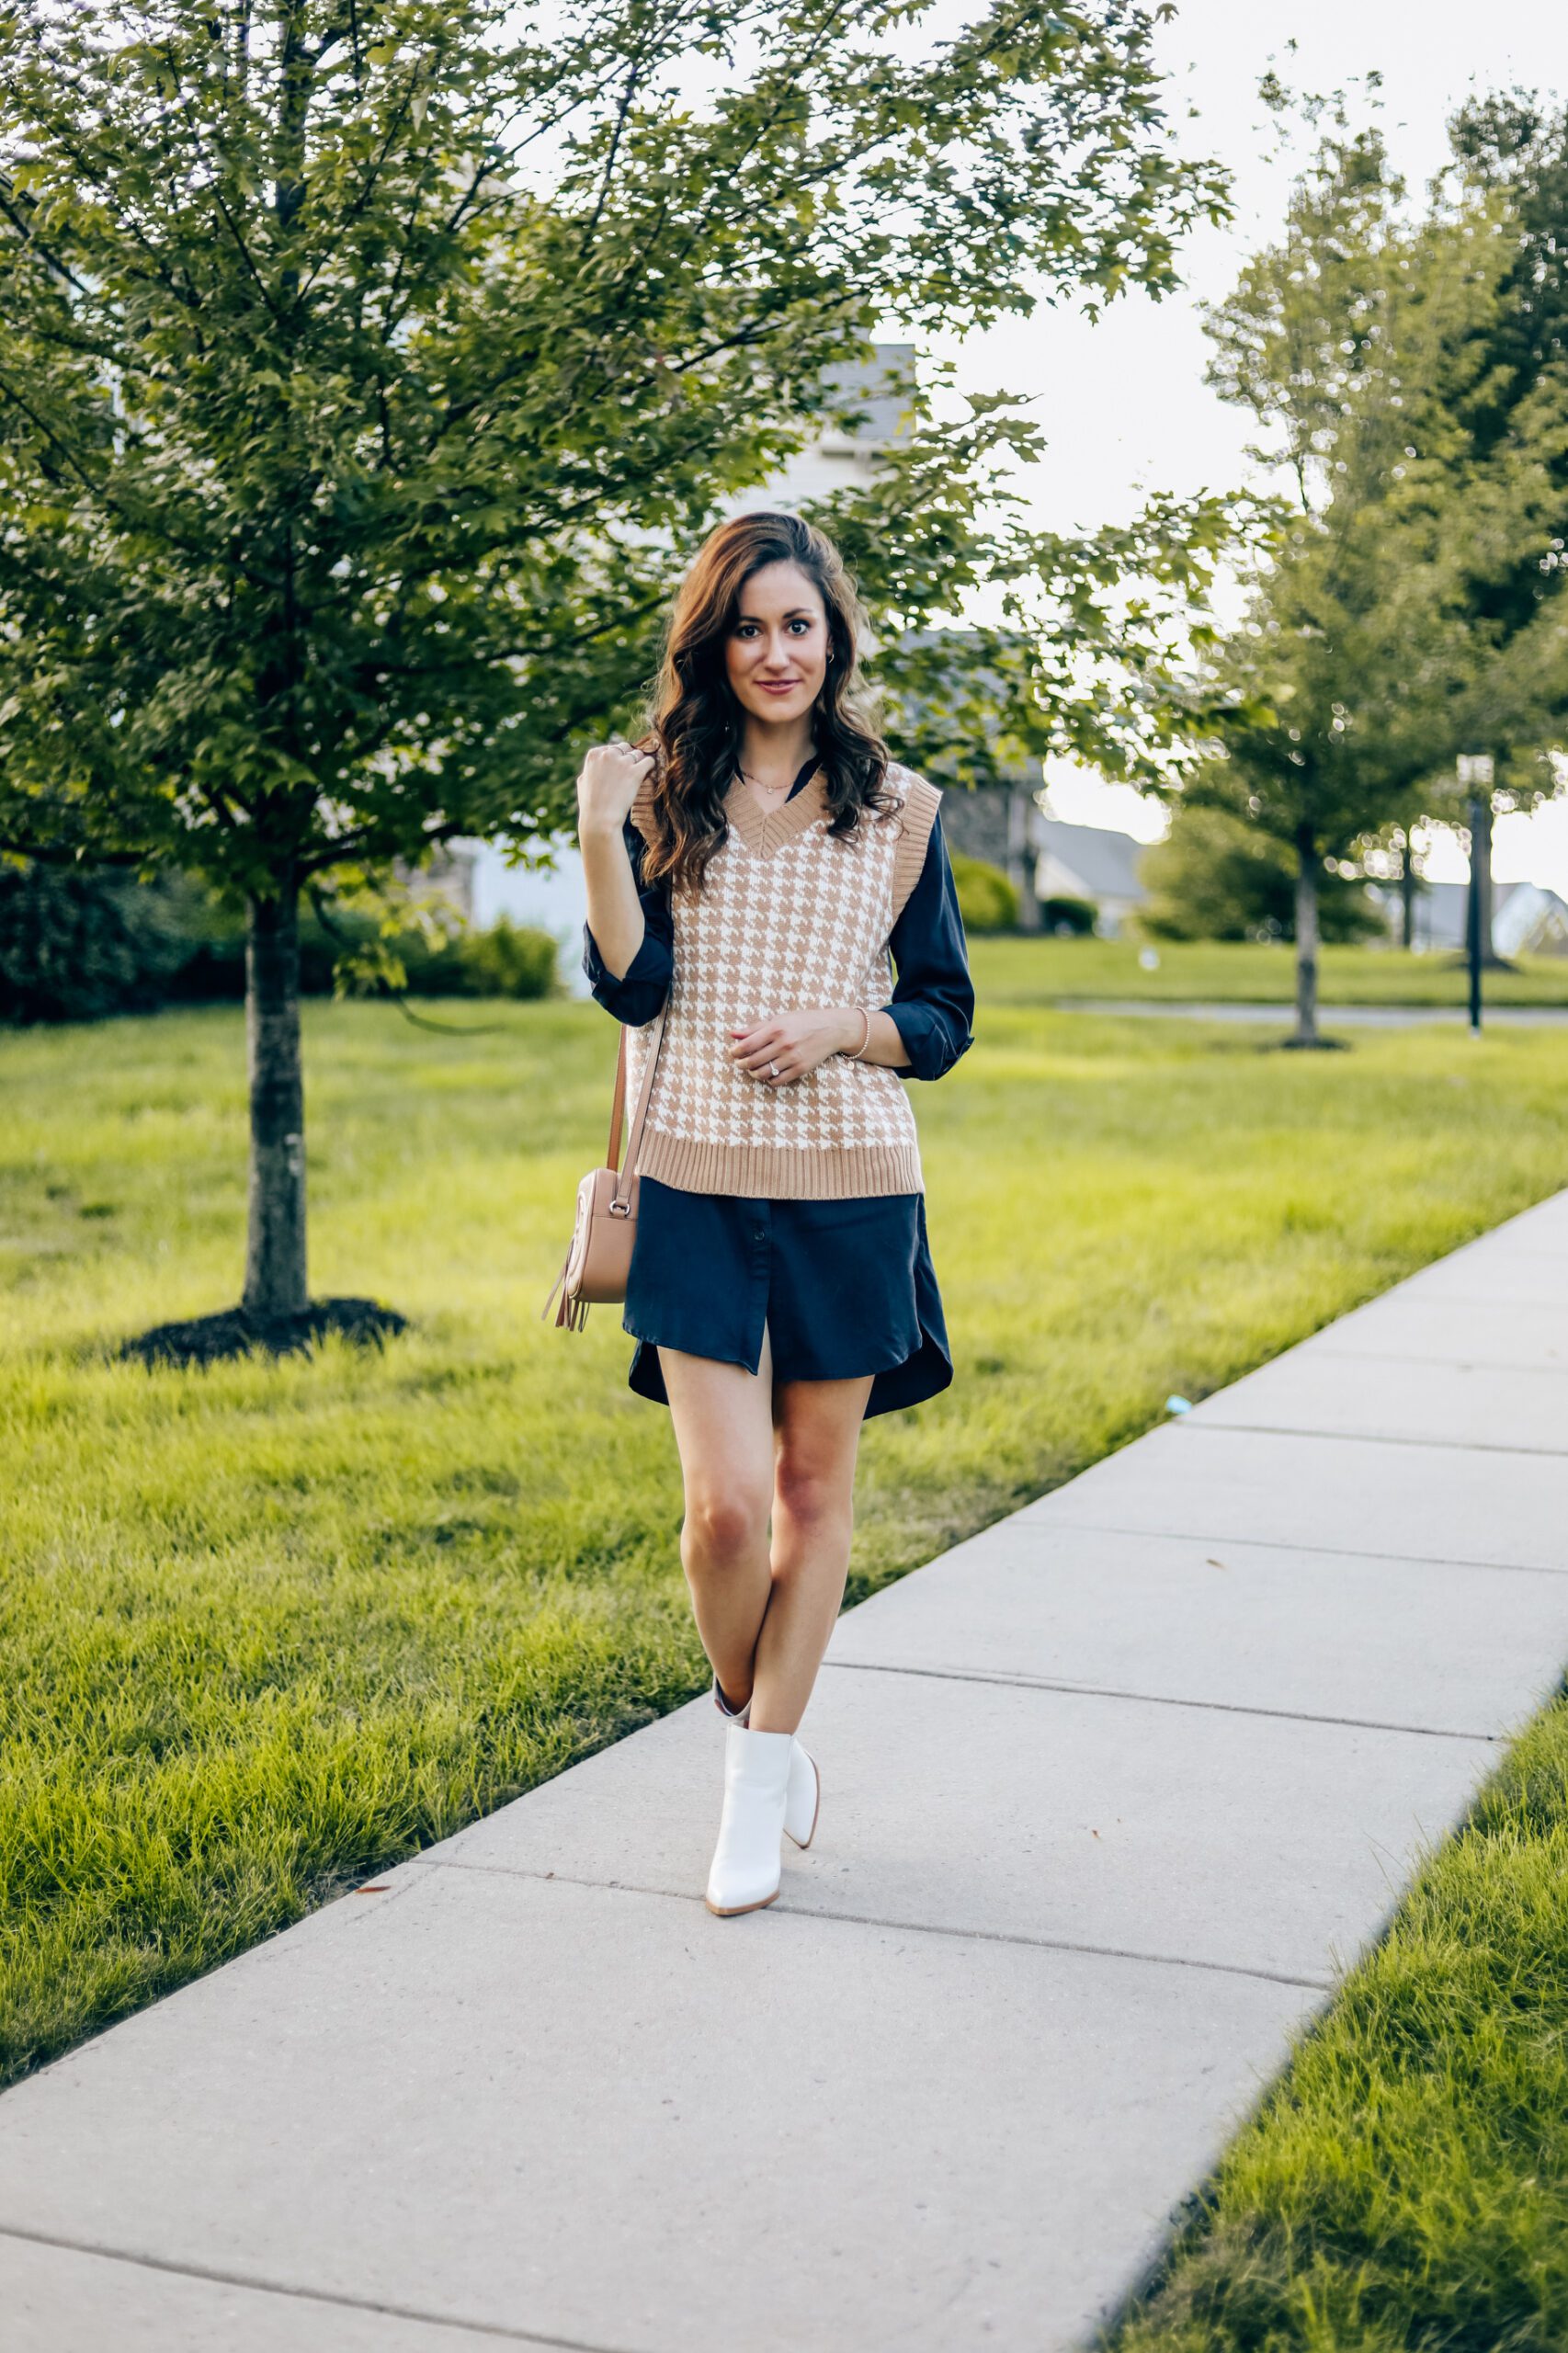 HOW TO STYLE A SWEATER VEST FOR FALL - Chic Sweater Vest Outfit Idea from Amazon on Coming Up Roses!